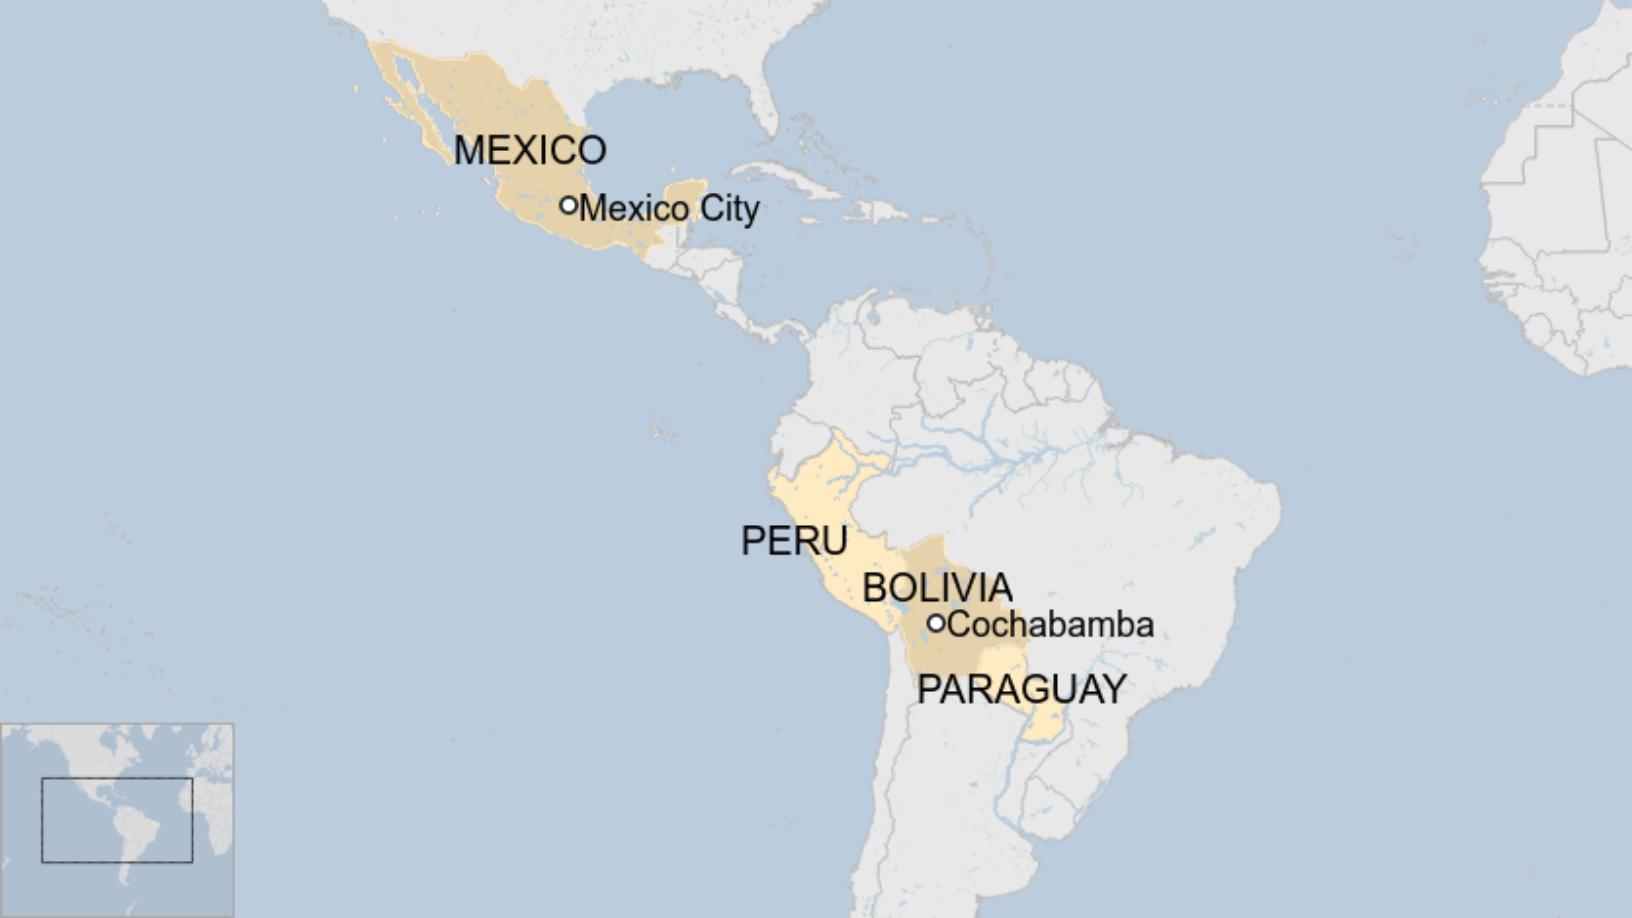 Map: A map showing countries in South America